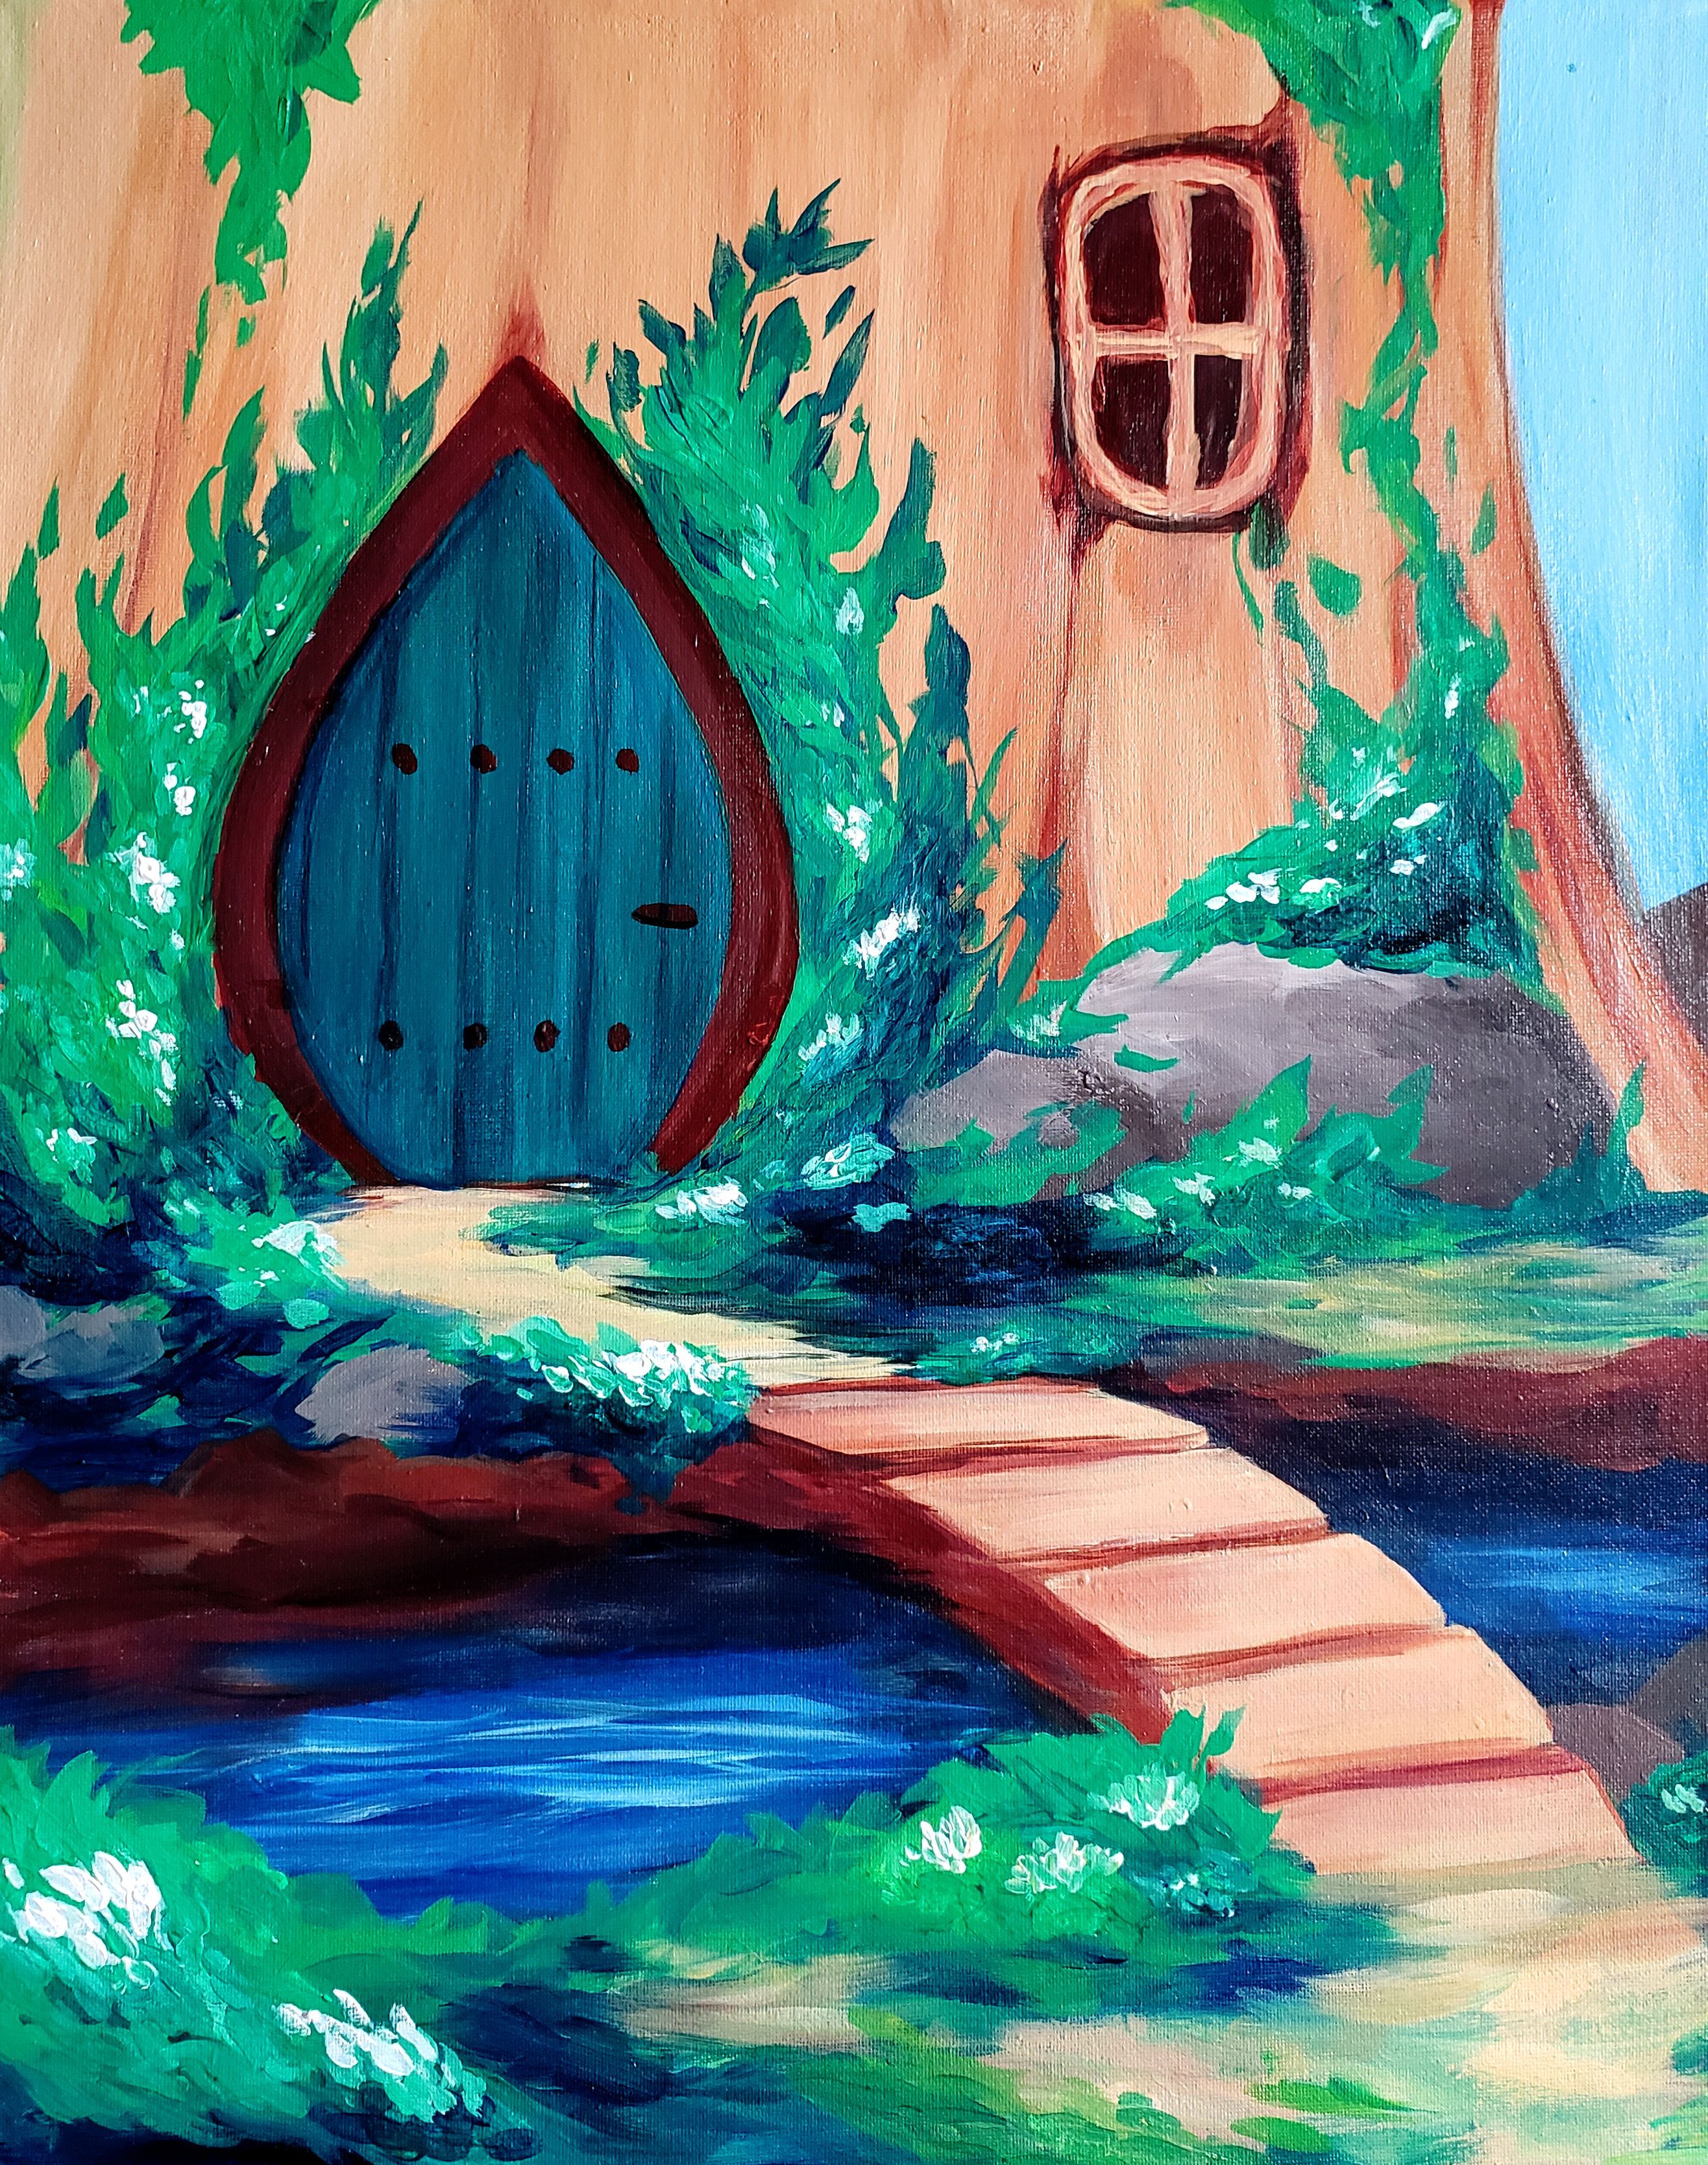 A Fairy Door experience project by Yaymaker